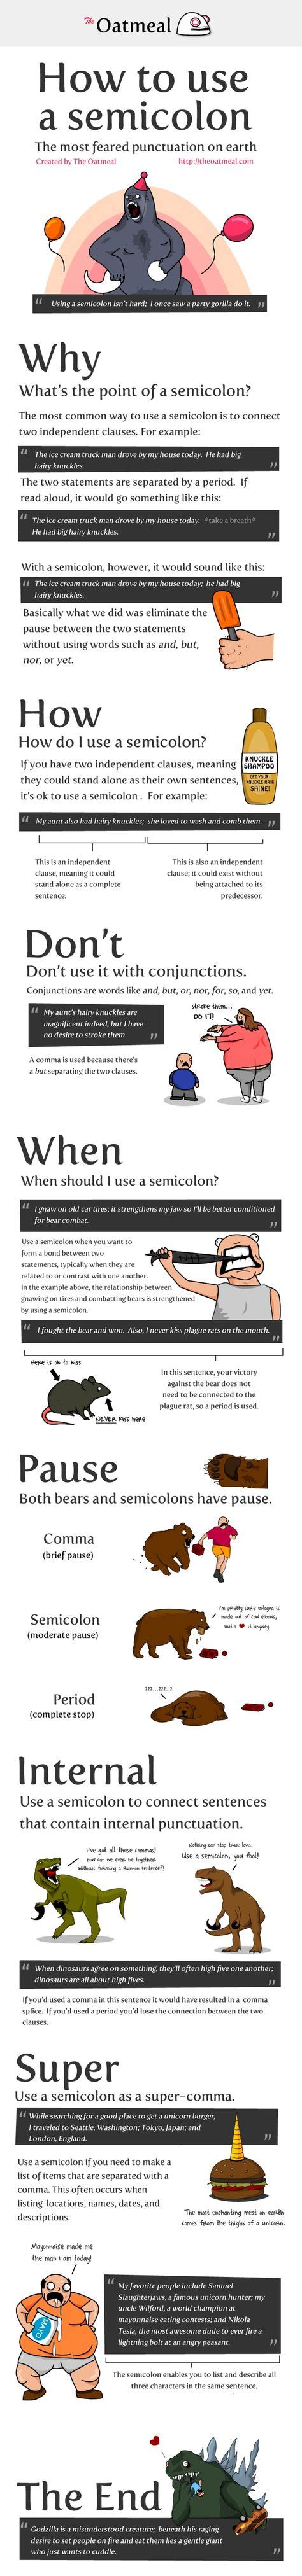 How the use of digital communication changed grammatical standards in a fairly universal manner. how to use a semicolon | English grammar, Teaching writing, English